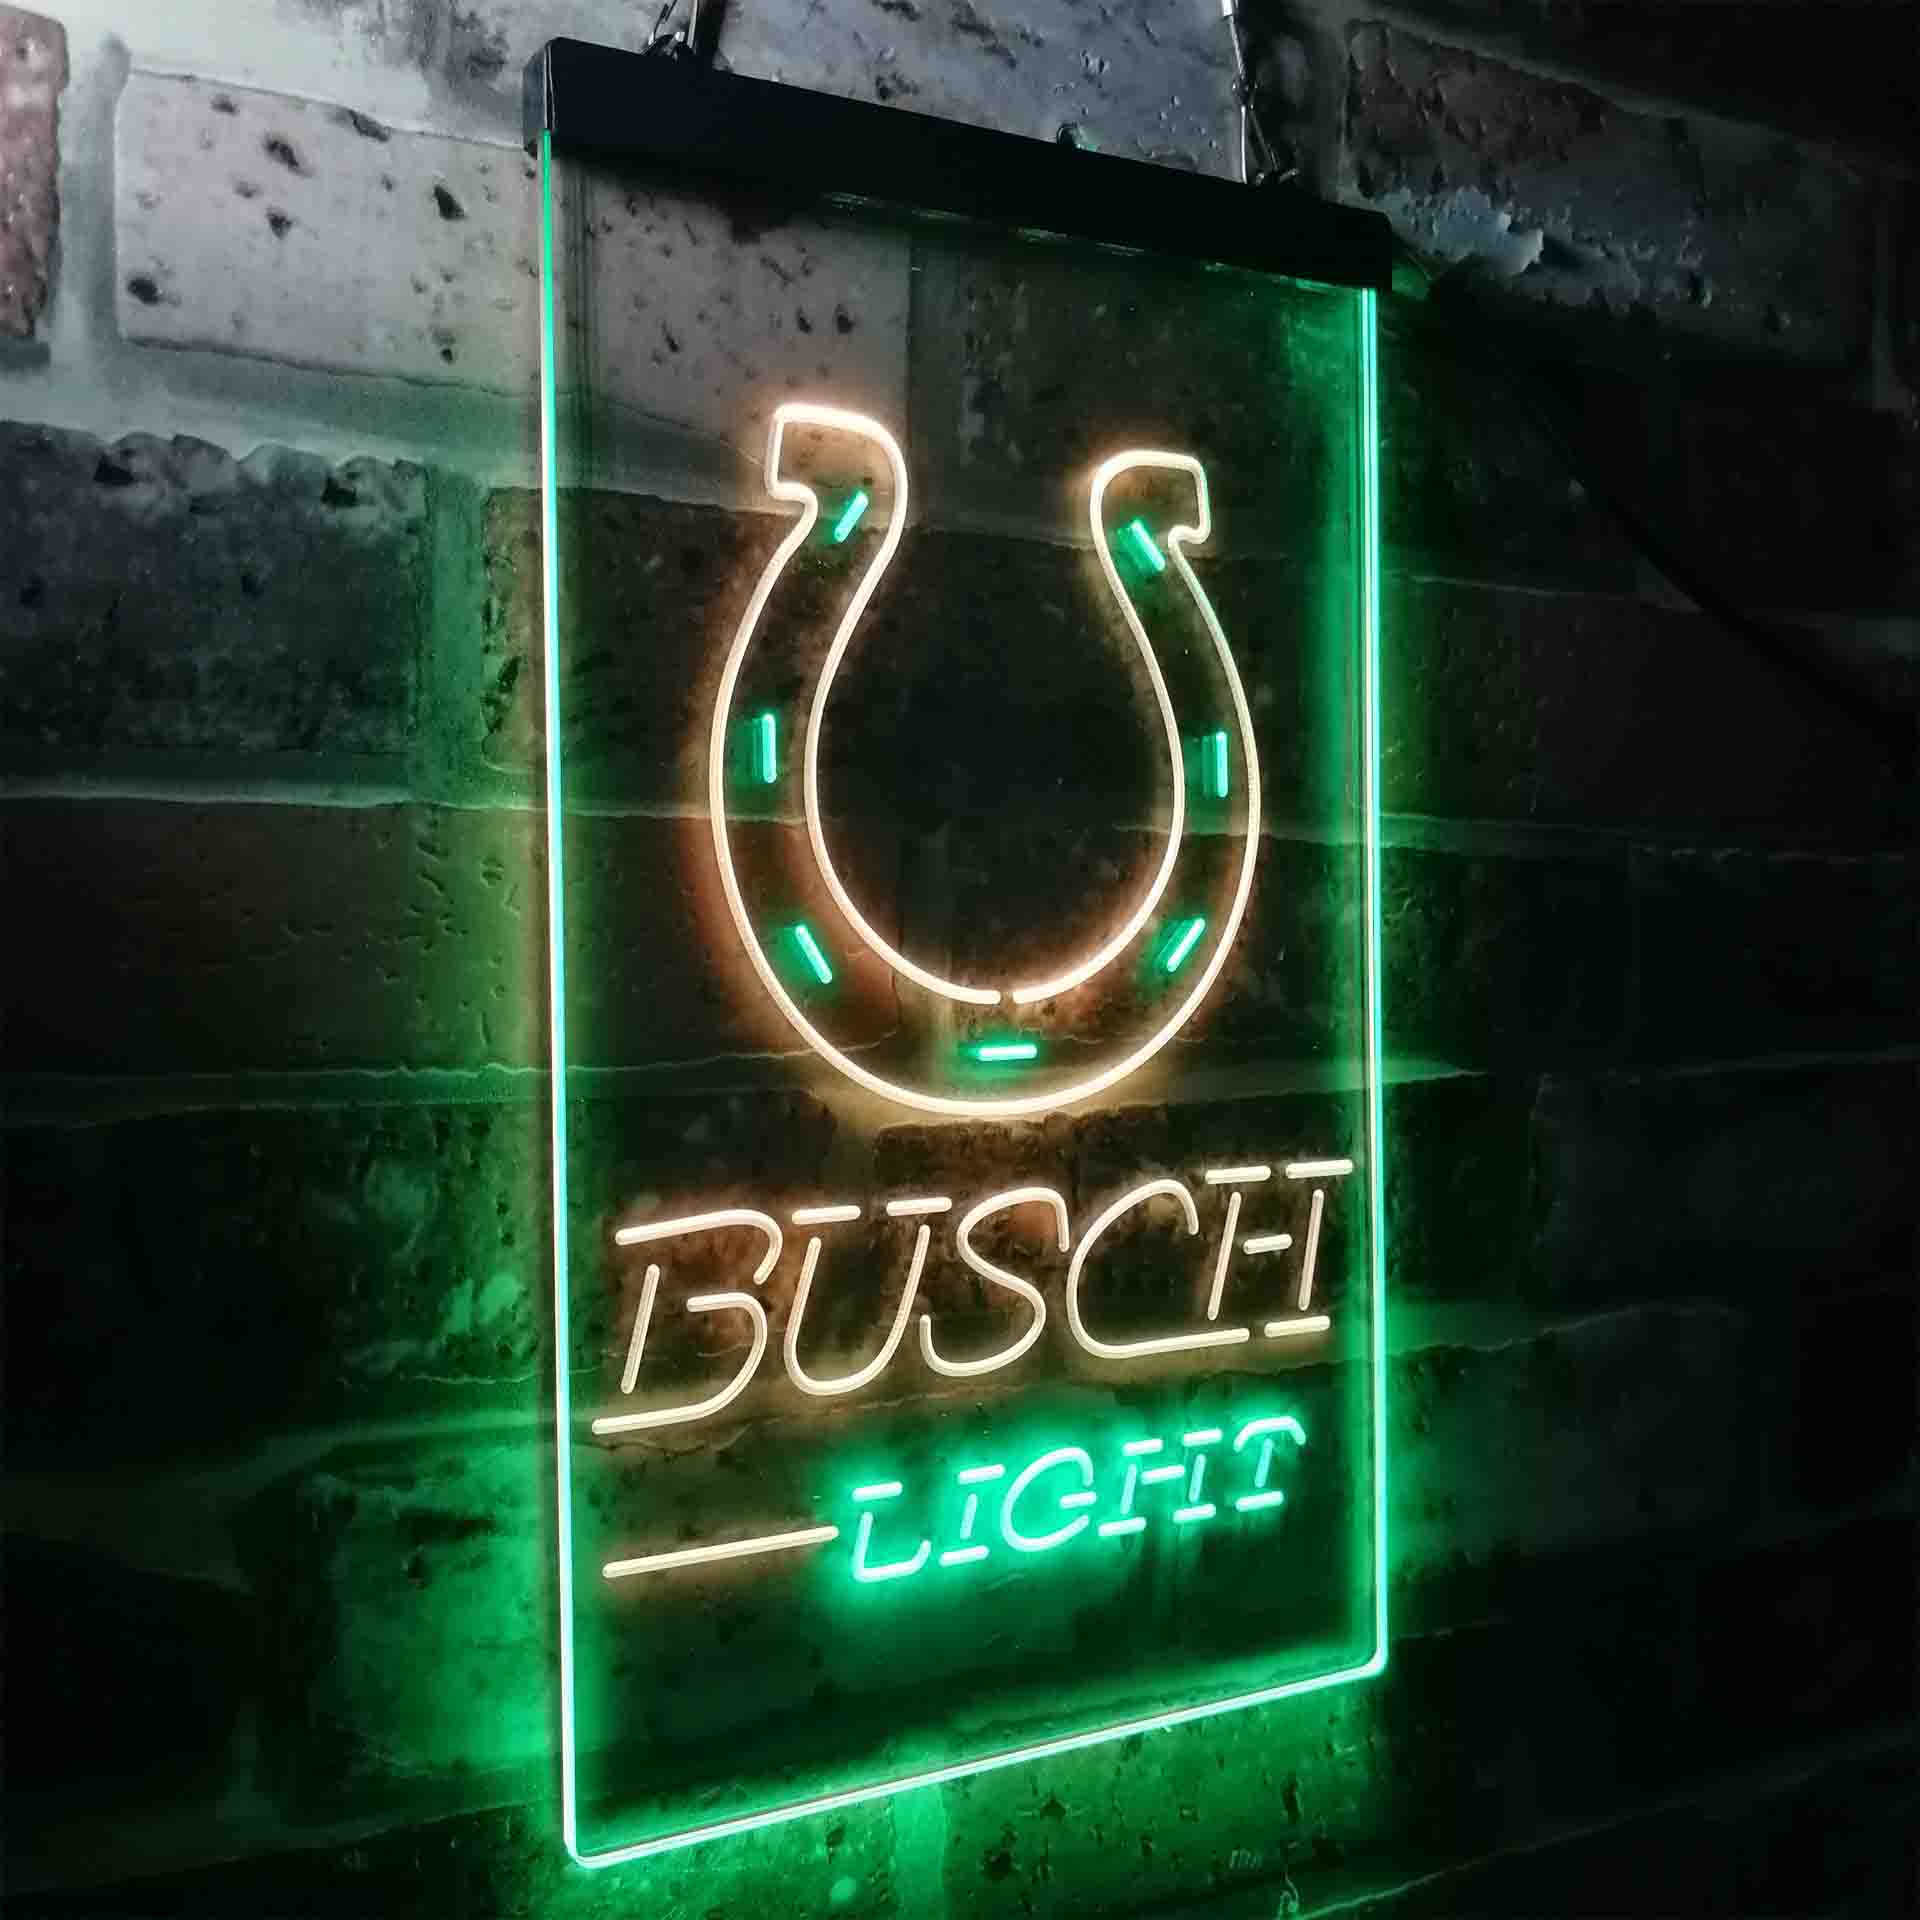 Indianapolis Colt Busch Light LED Neon Sign